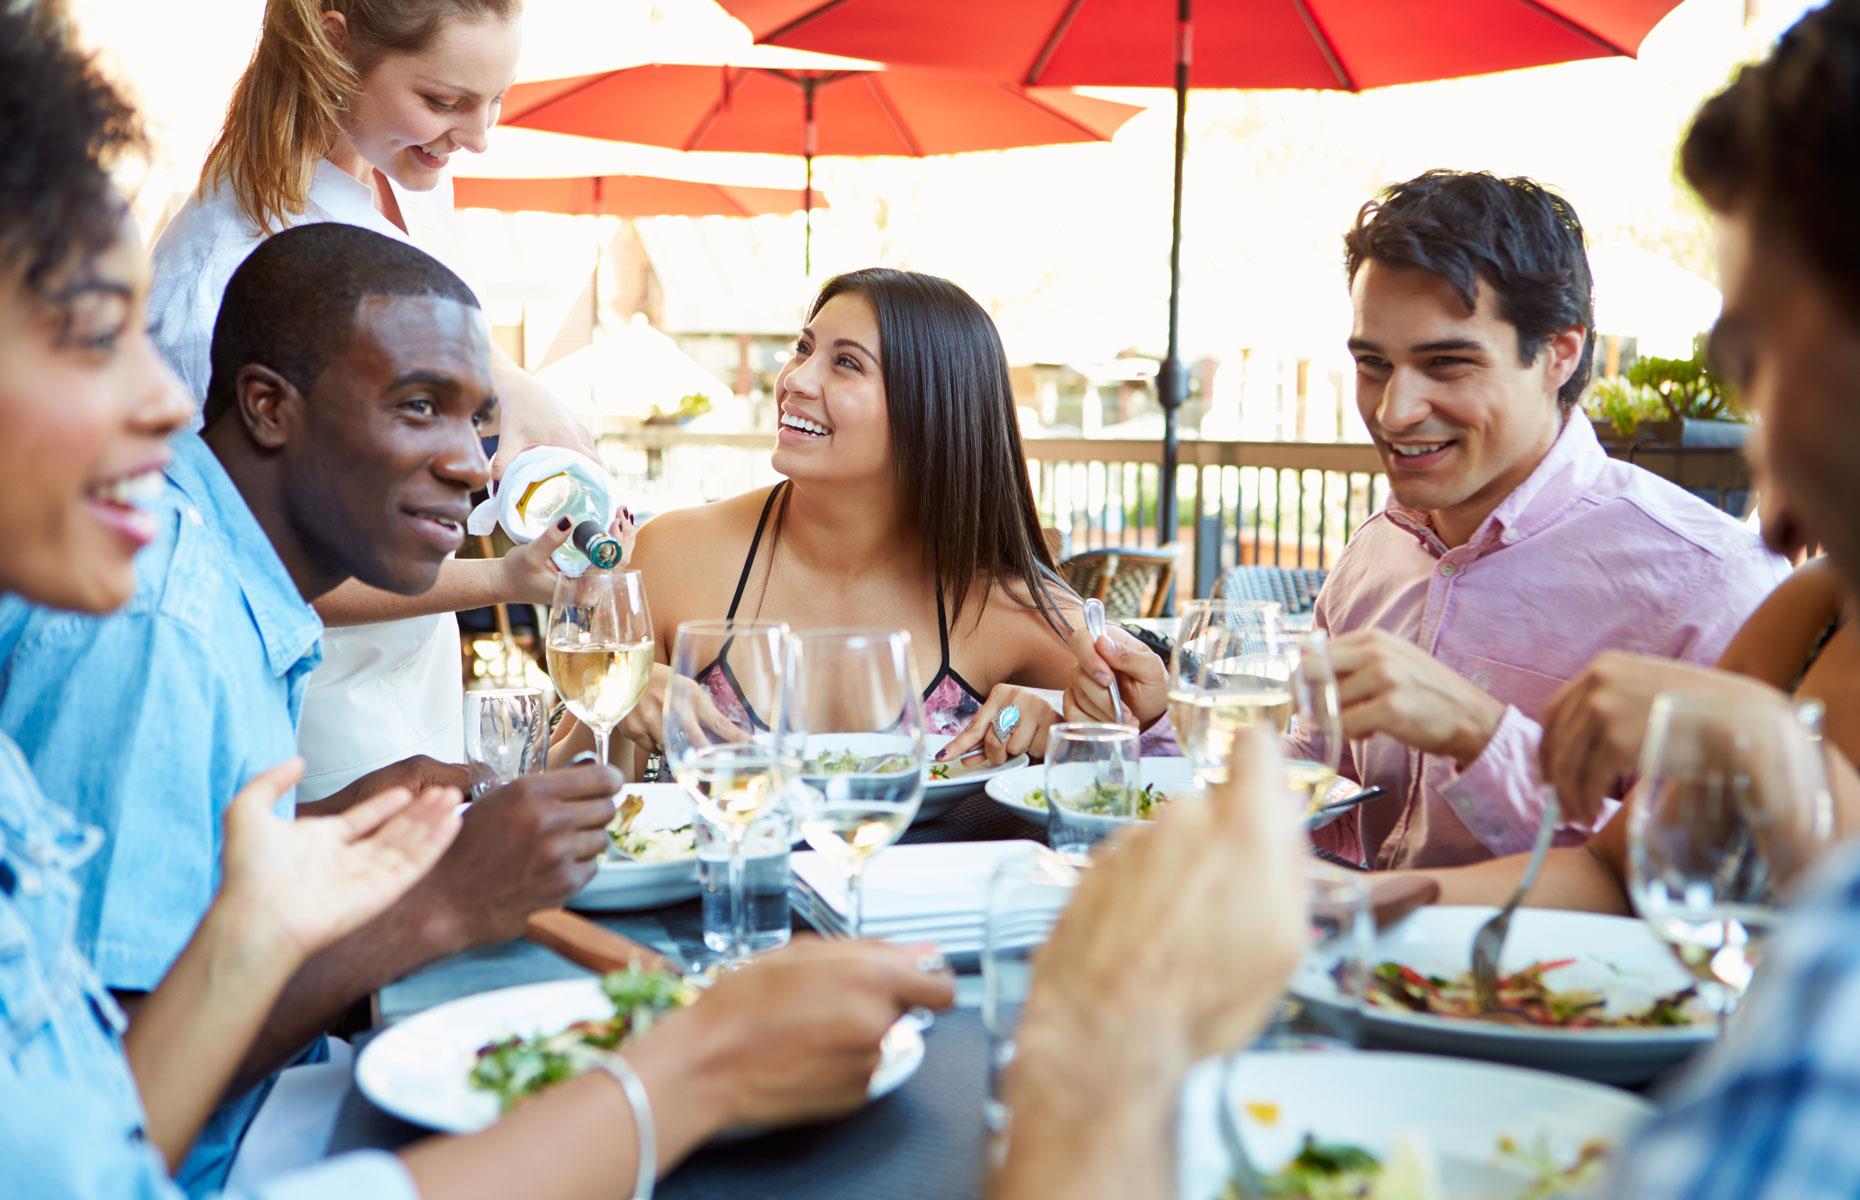 The rich spend 5.4% of their income on eating out